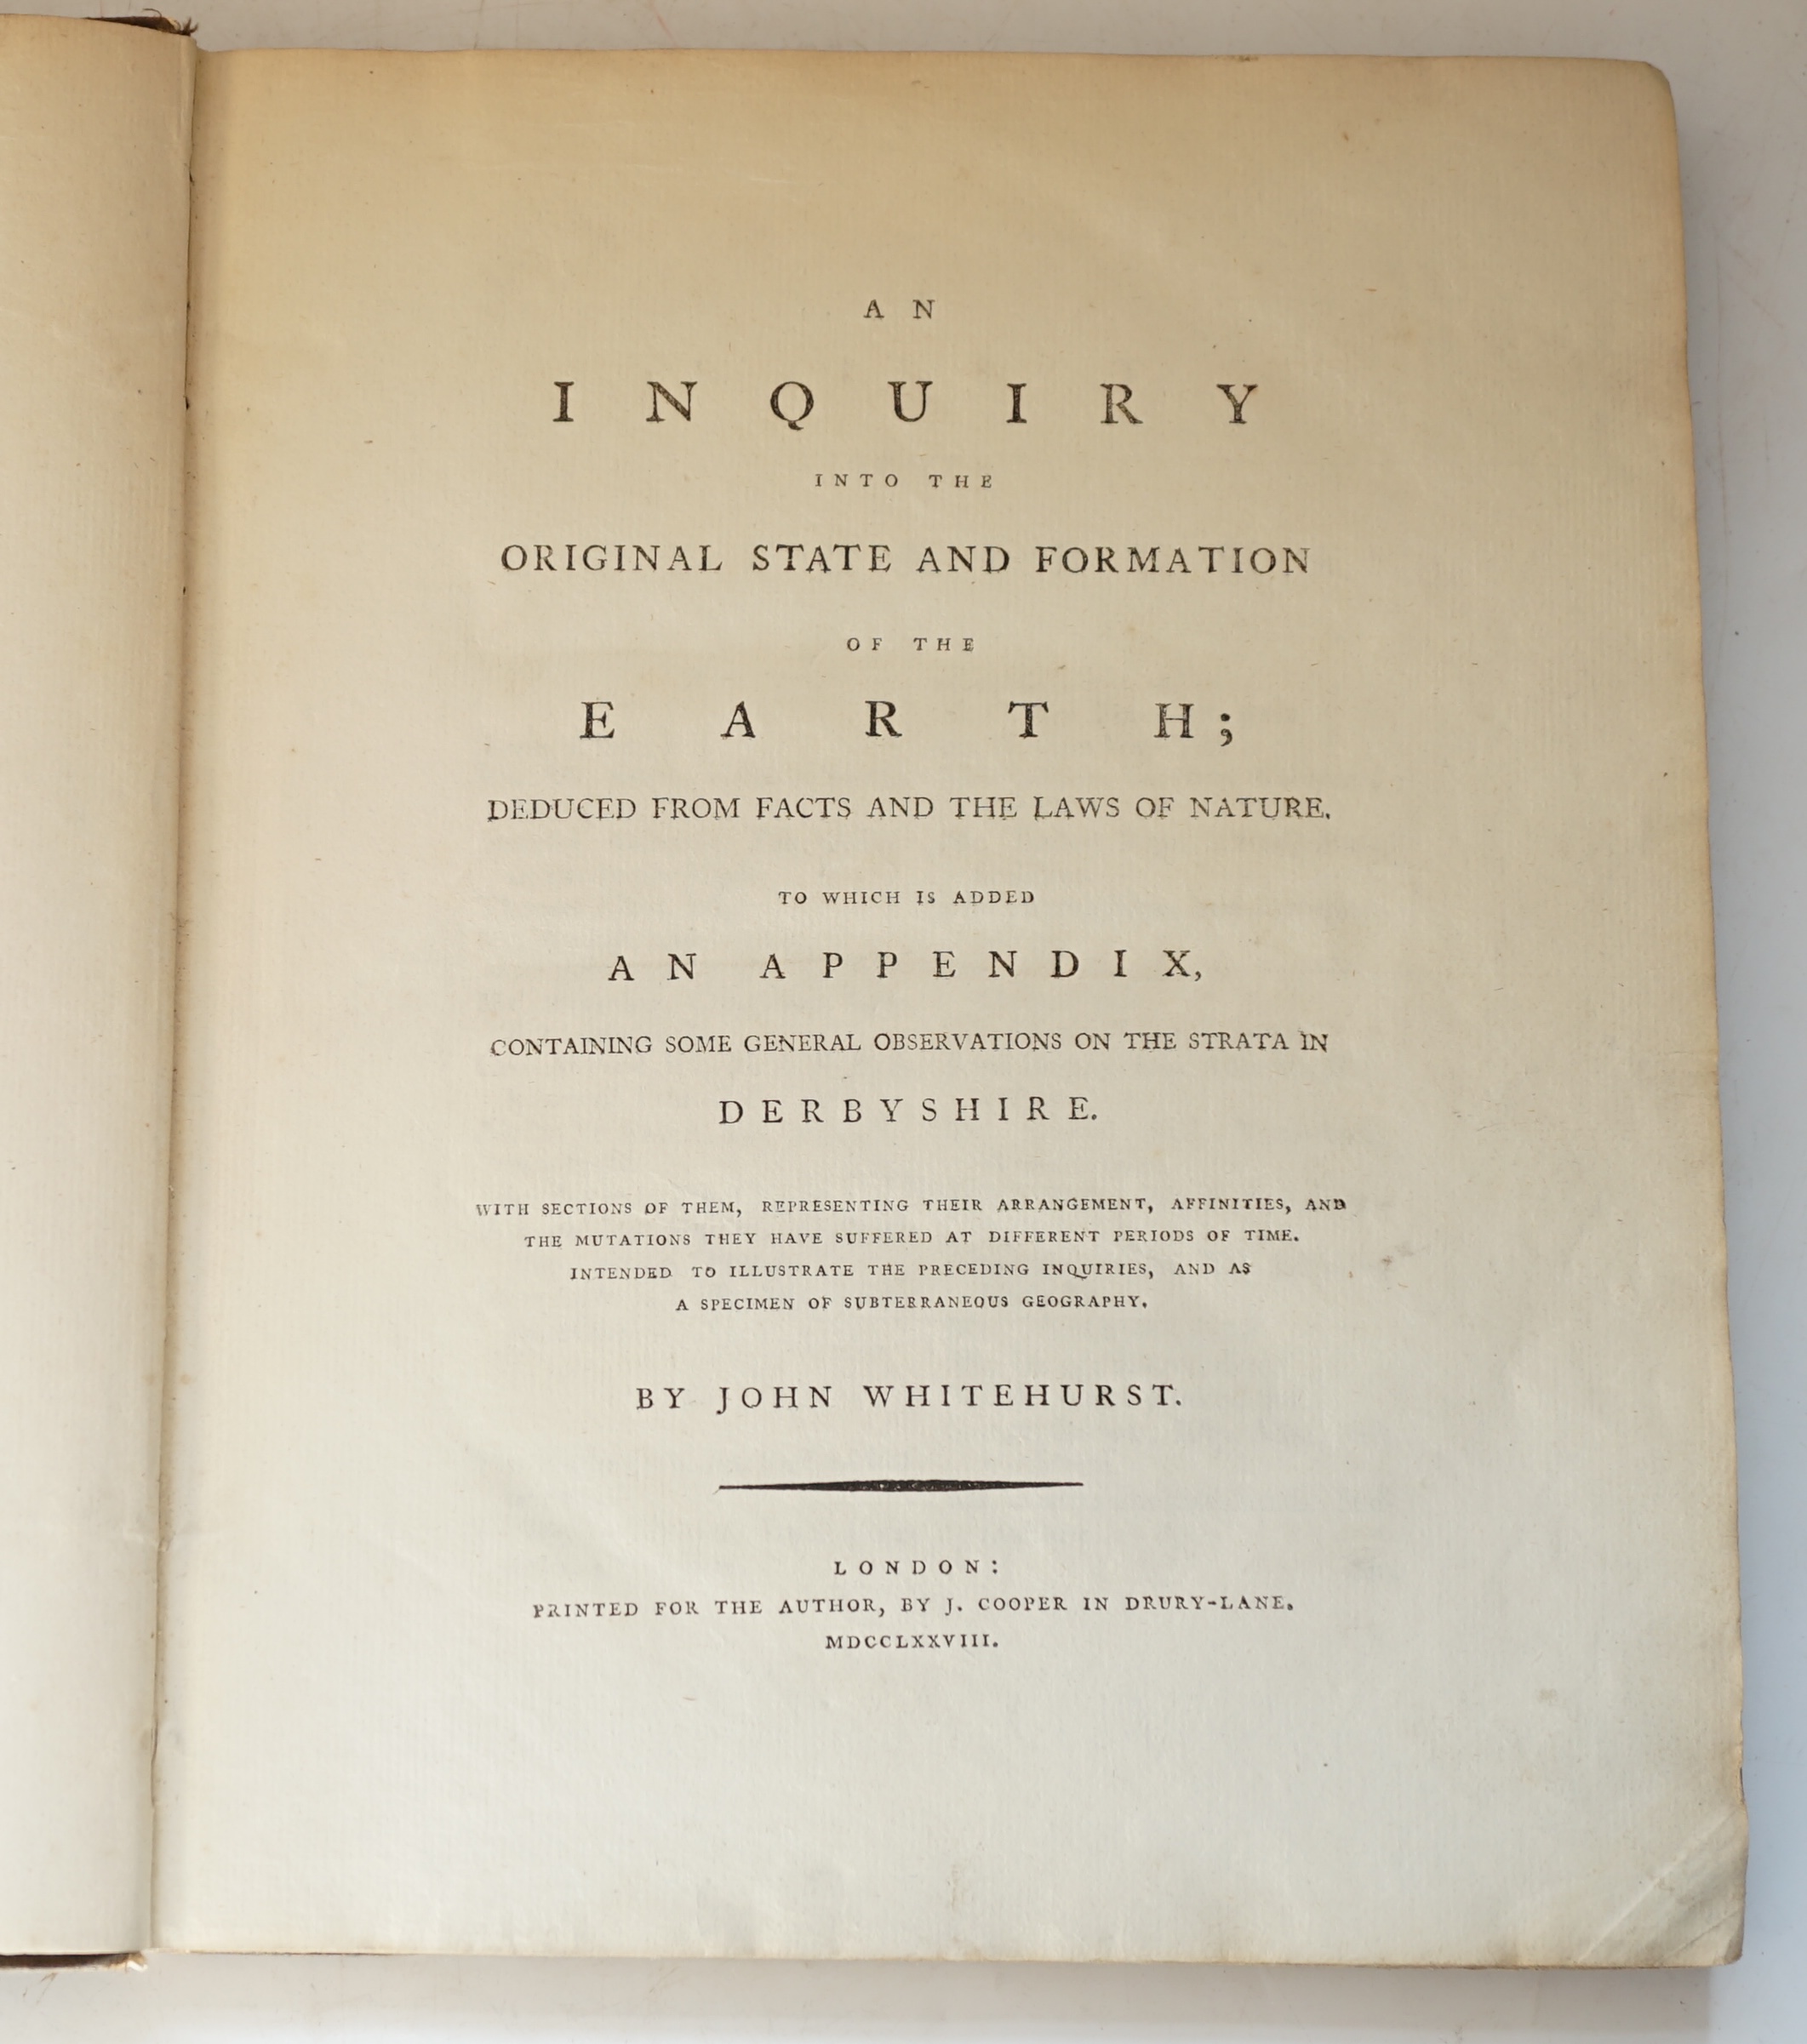 Whitehurst, John - An inquiry into the original State and Formation of the Earth; deduced from facts and the laws of nature. To which is added an appendix, containing some general observations on the Strata in Derbyshire